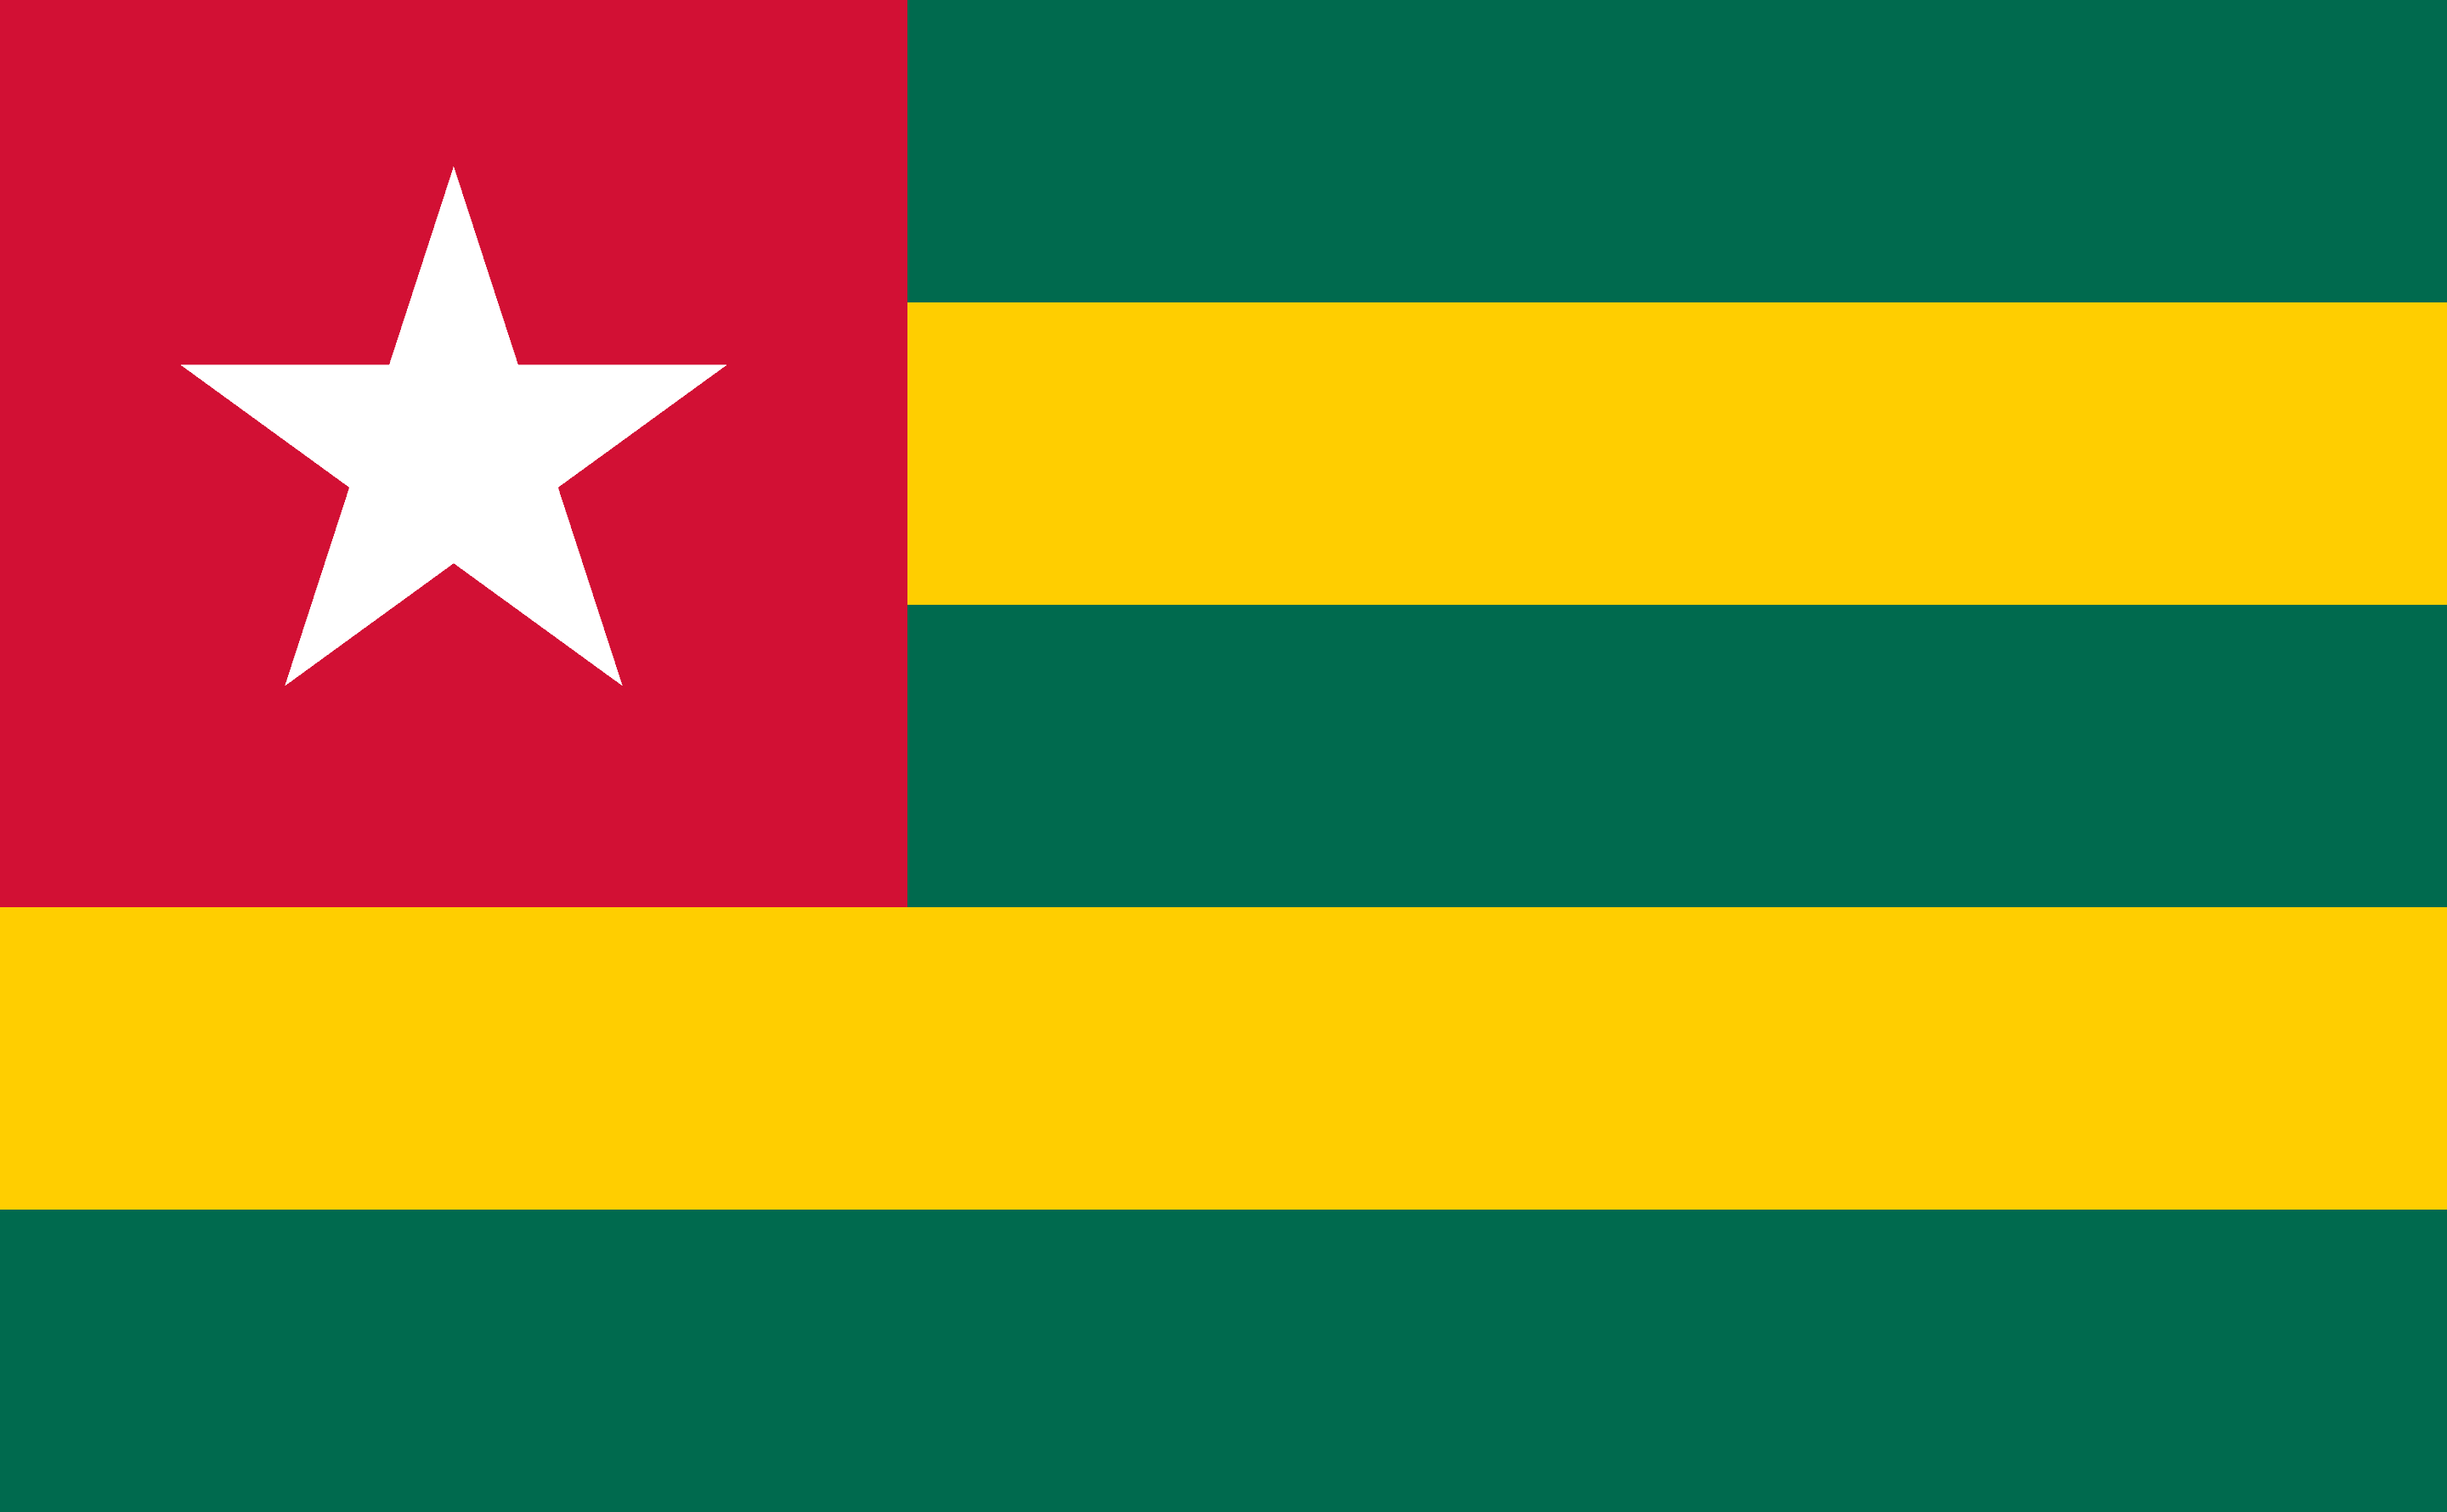 Drone Laws in Togo